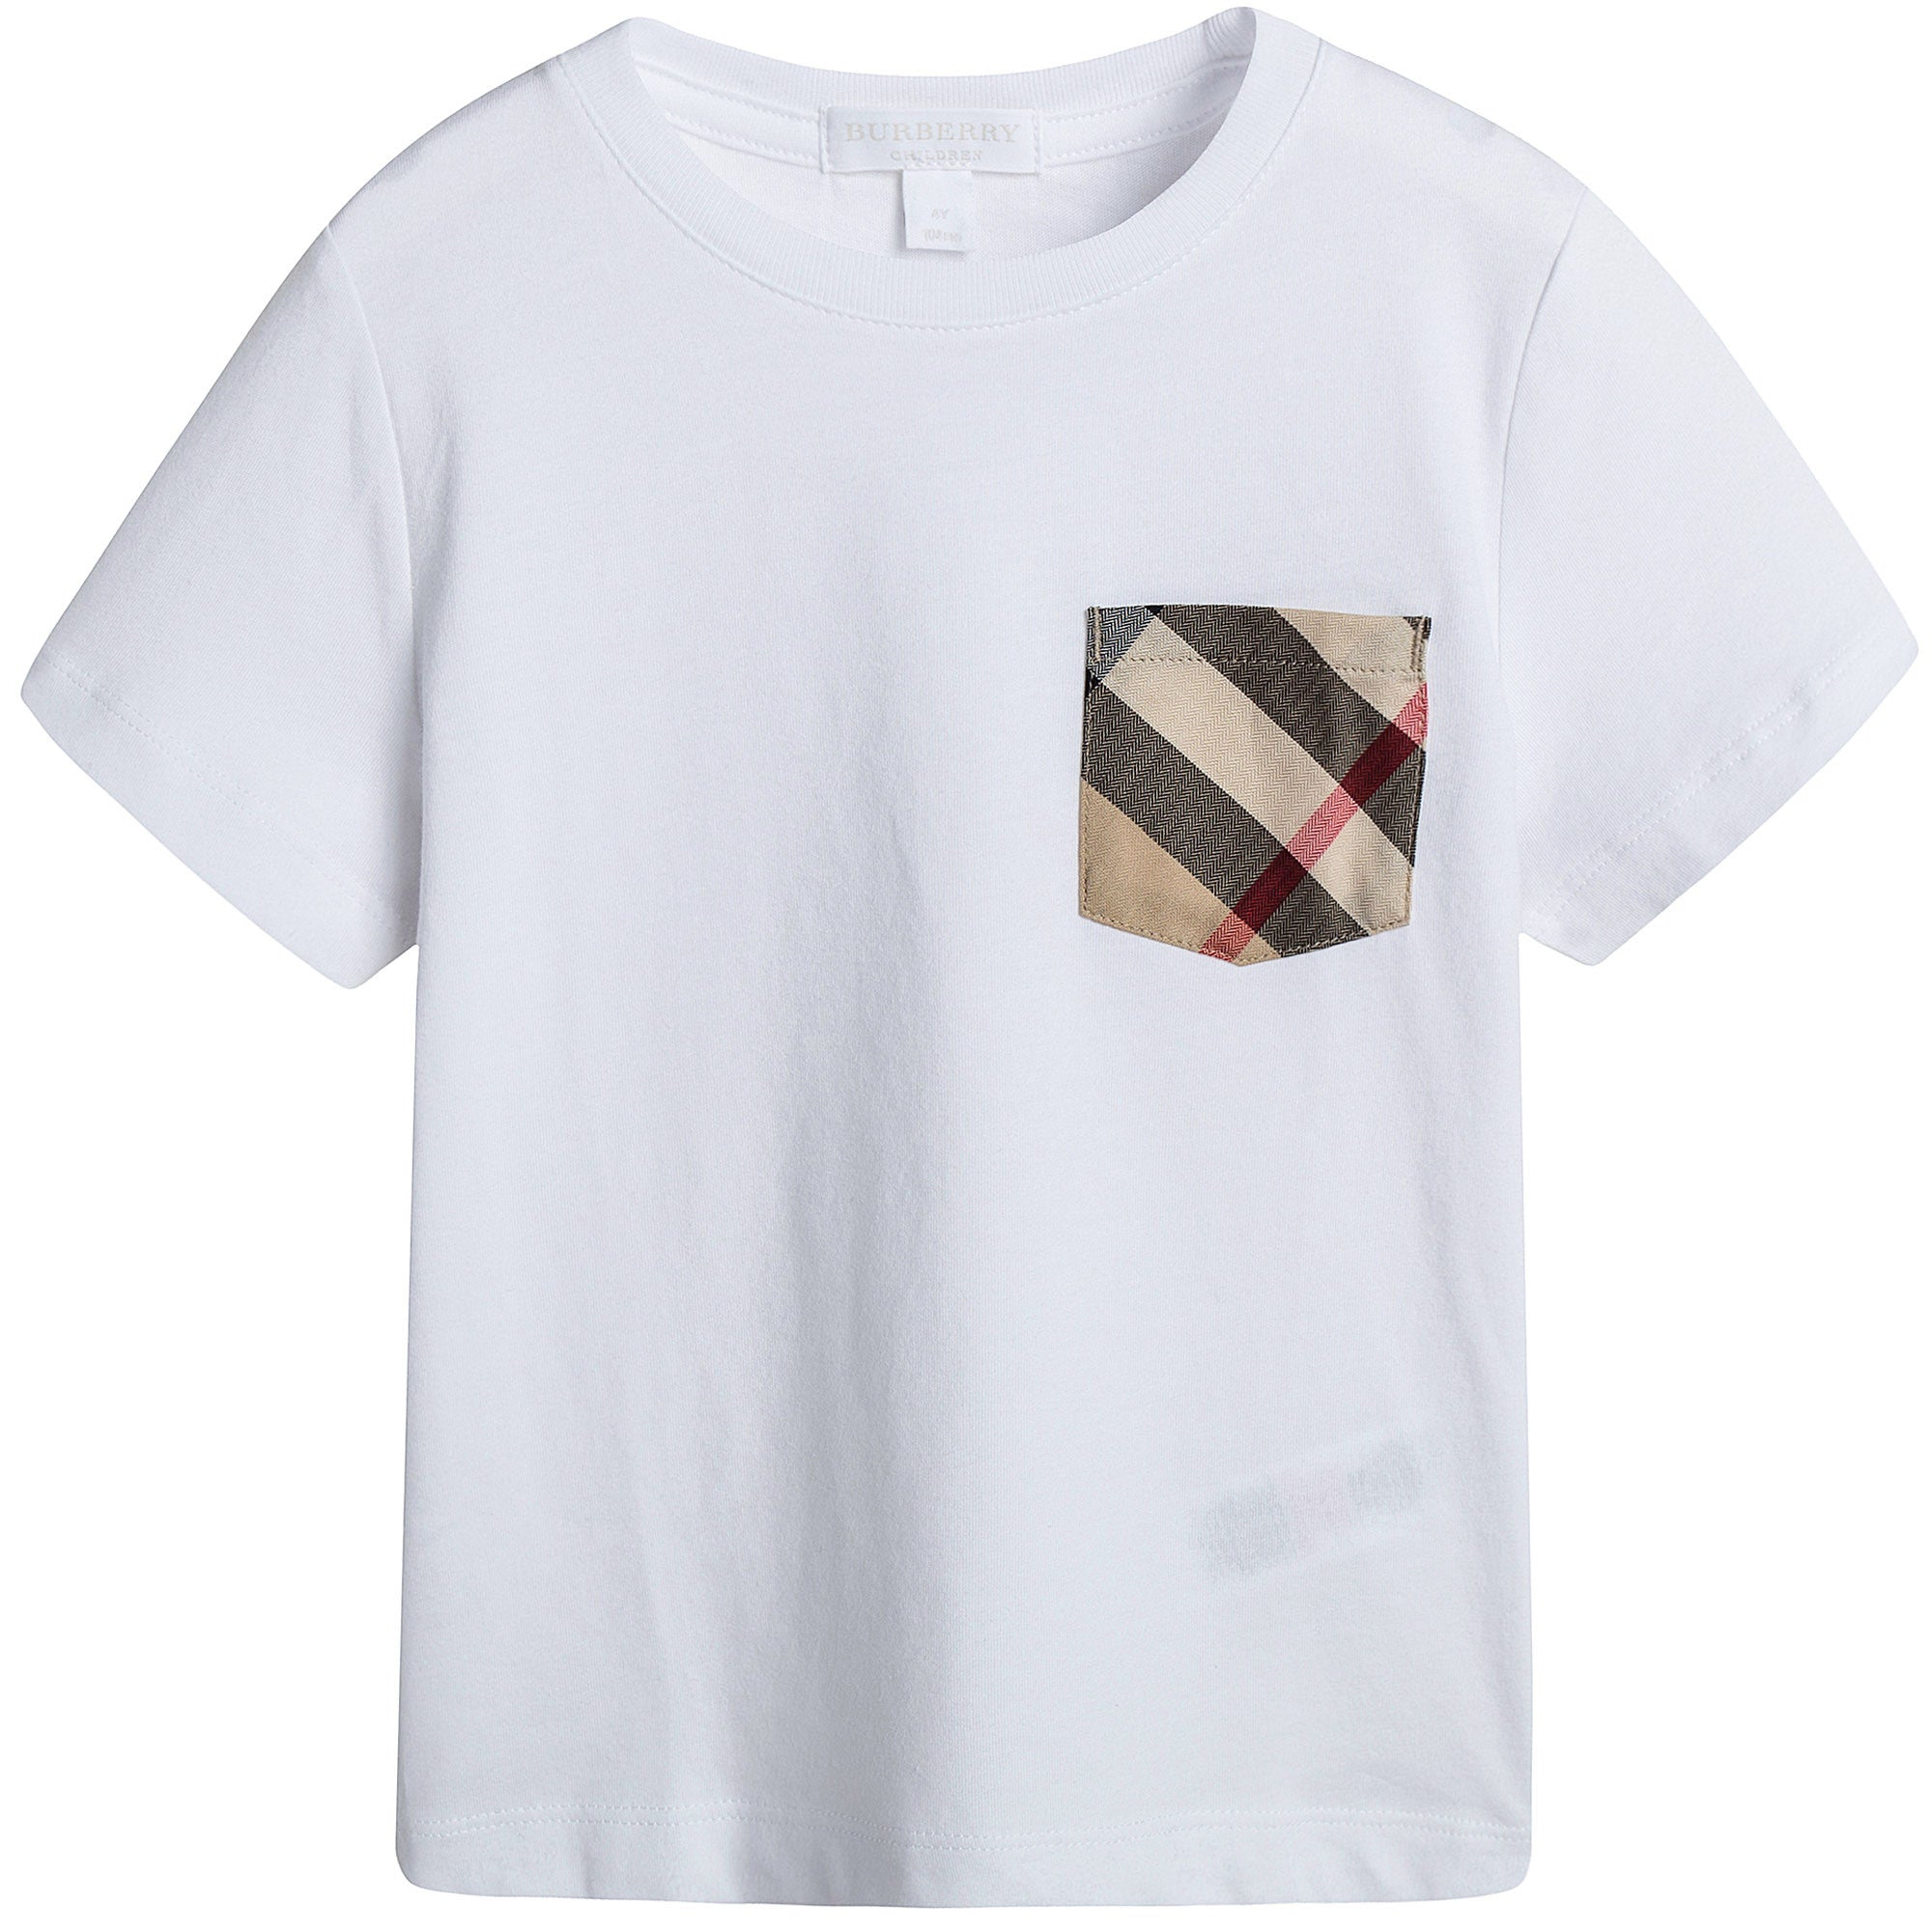 Boys White T-Shirt With Check Pocket